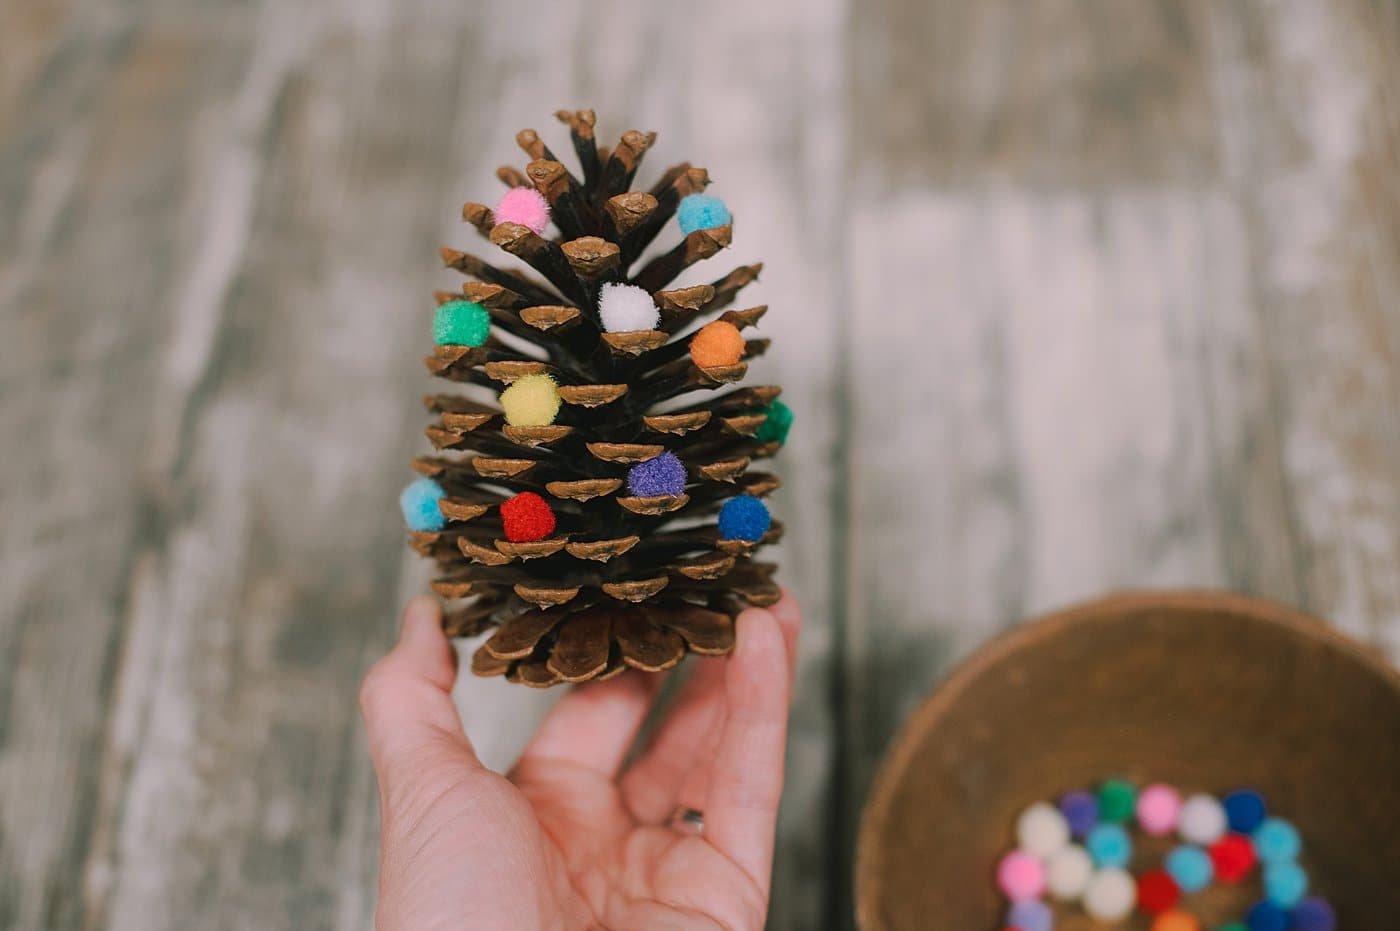 Continue to add pom poms to the edges of the pinecone.